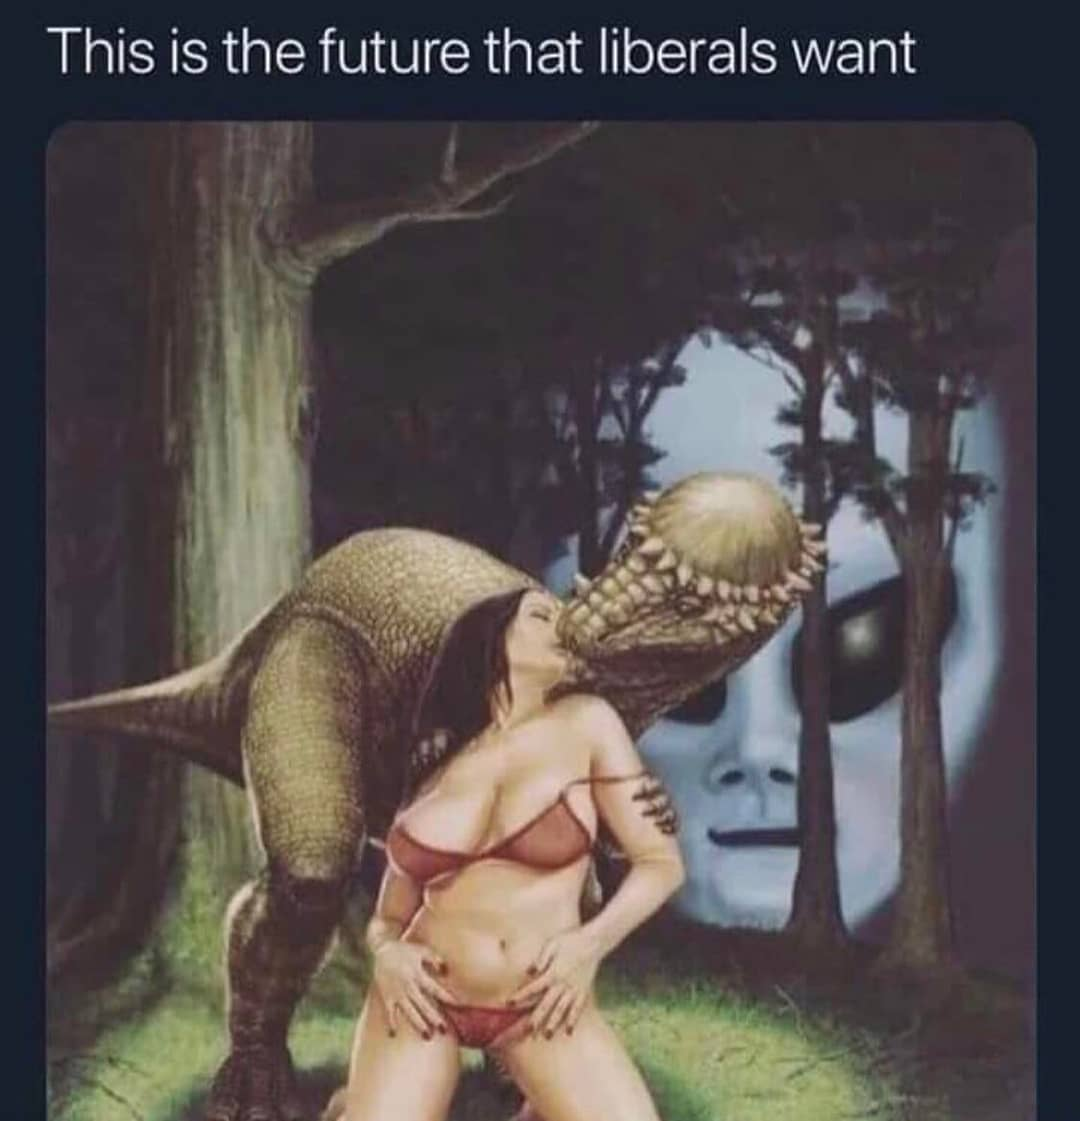 those damn liberals, i bet the dino is underaged too